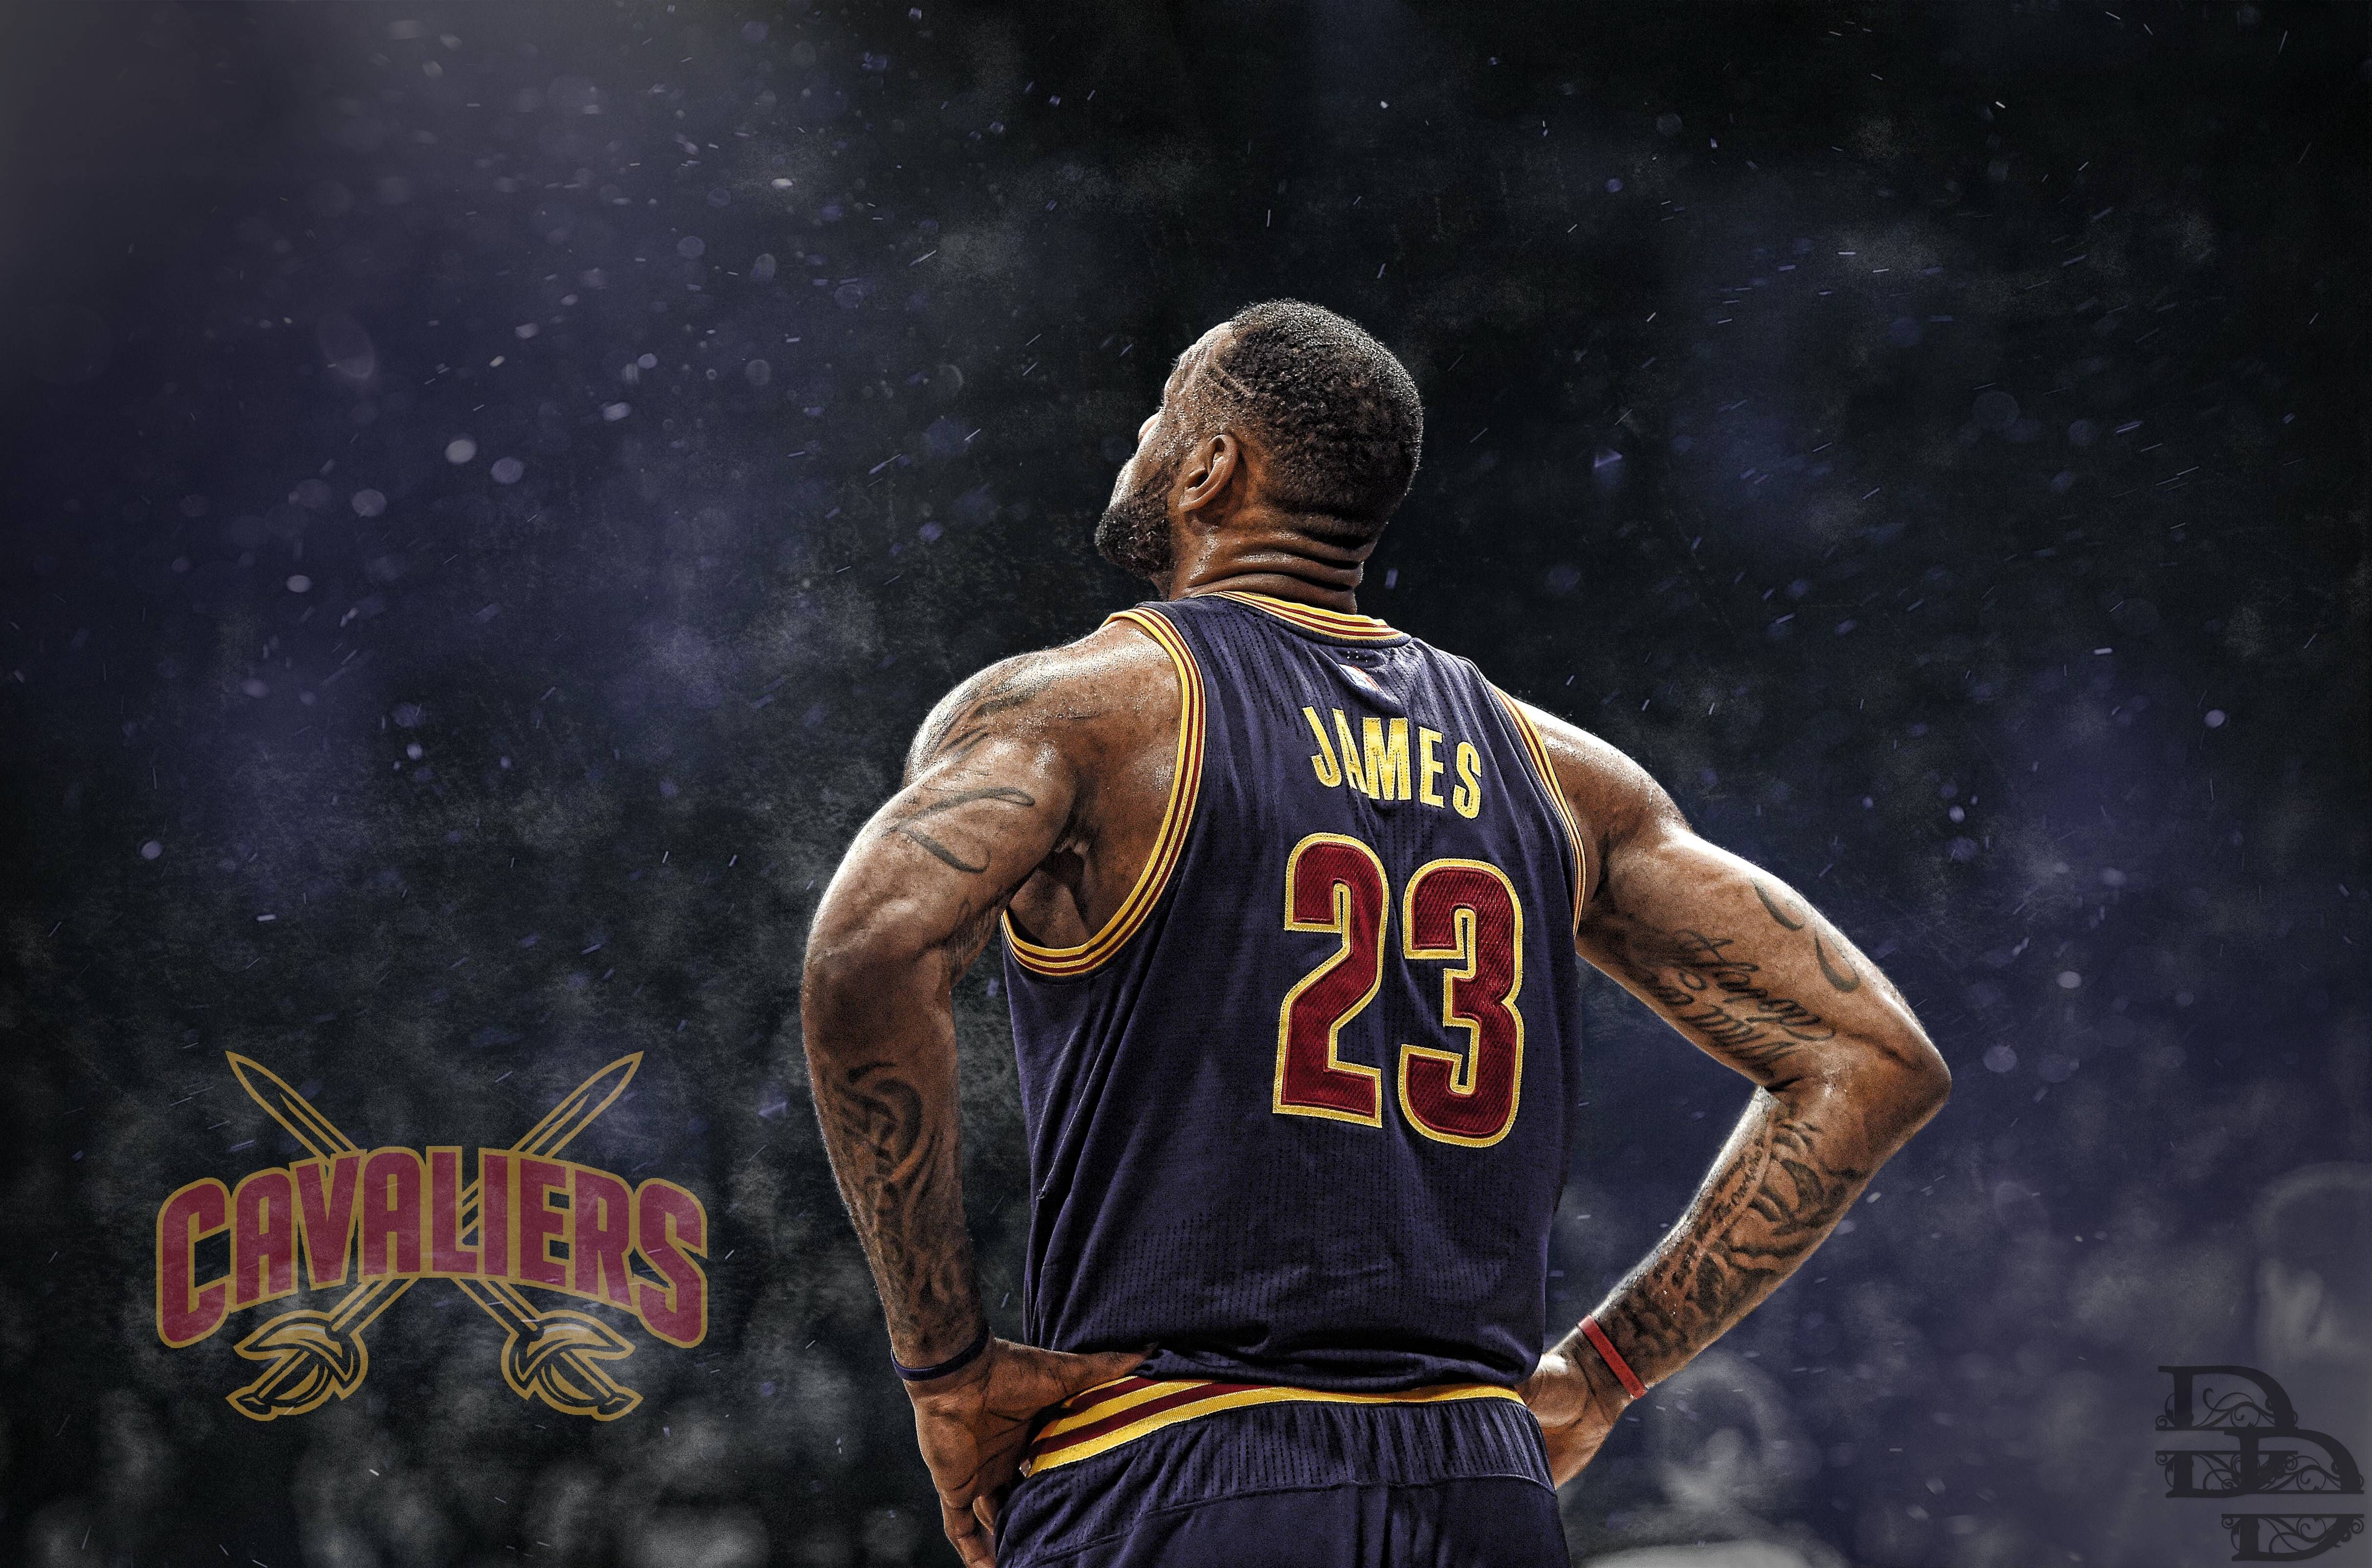 LeBron James phone wallpaper 1080P 2k 4k Full HD Wallpapers Backgrounds  Free Download  Wallpaper Crafter